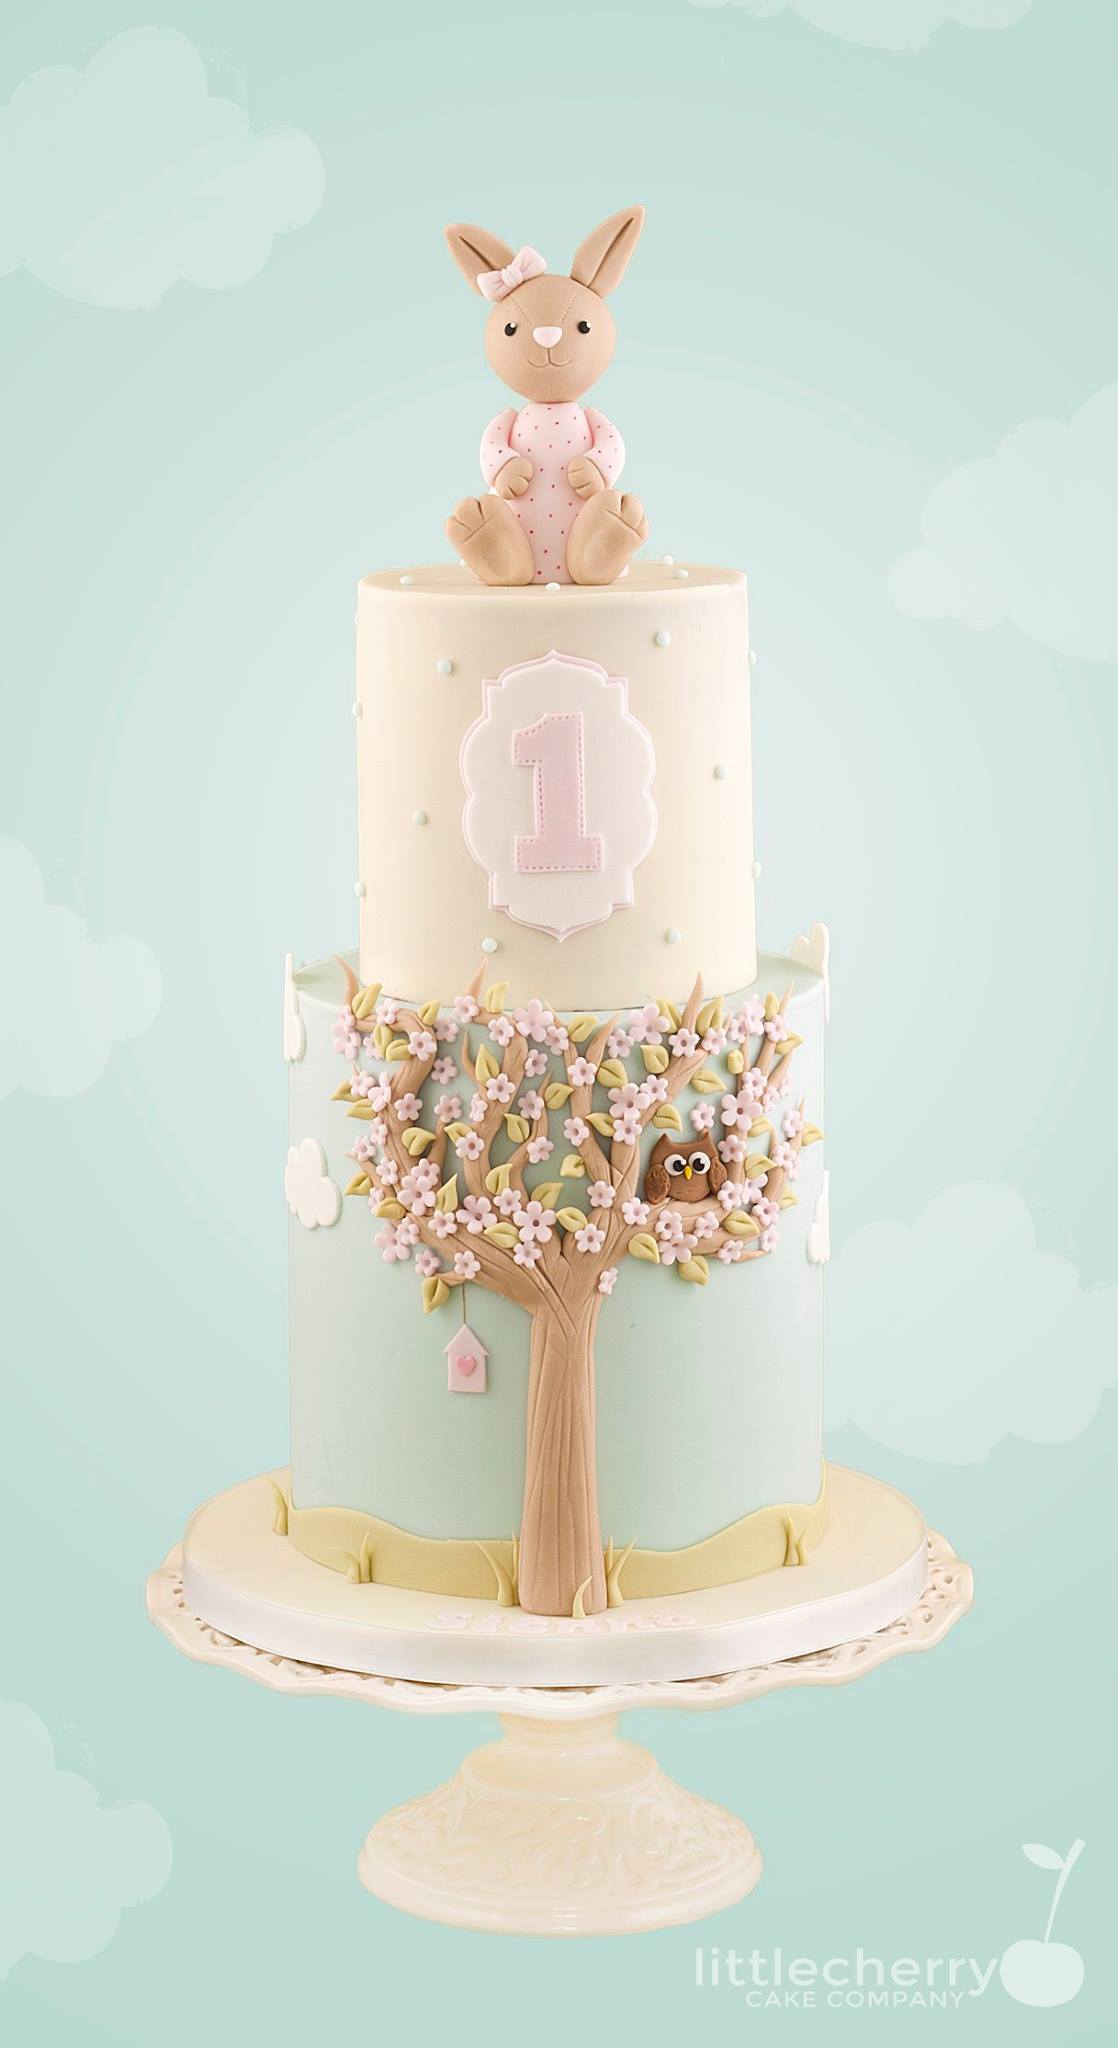  Easter Cake by Tracey Louise Rothwell - Little Cherry Cake Company